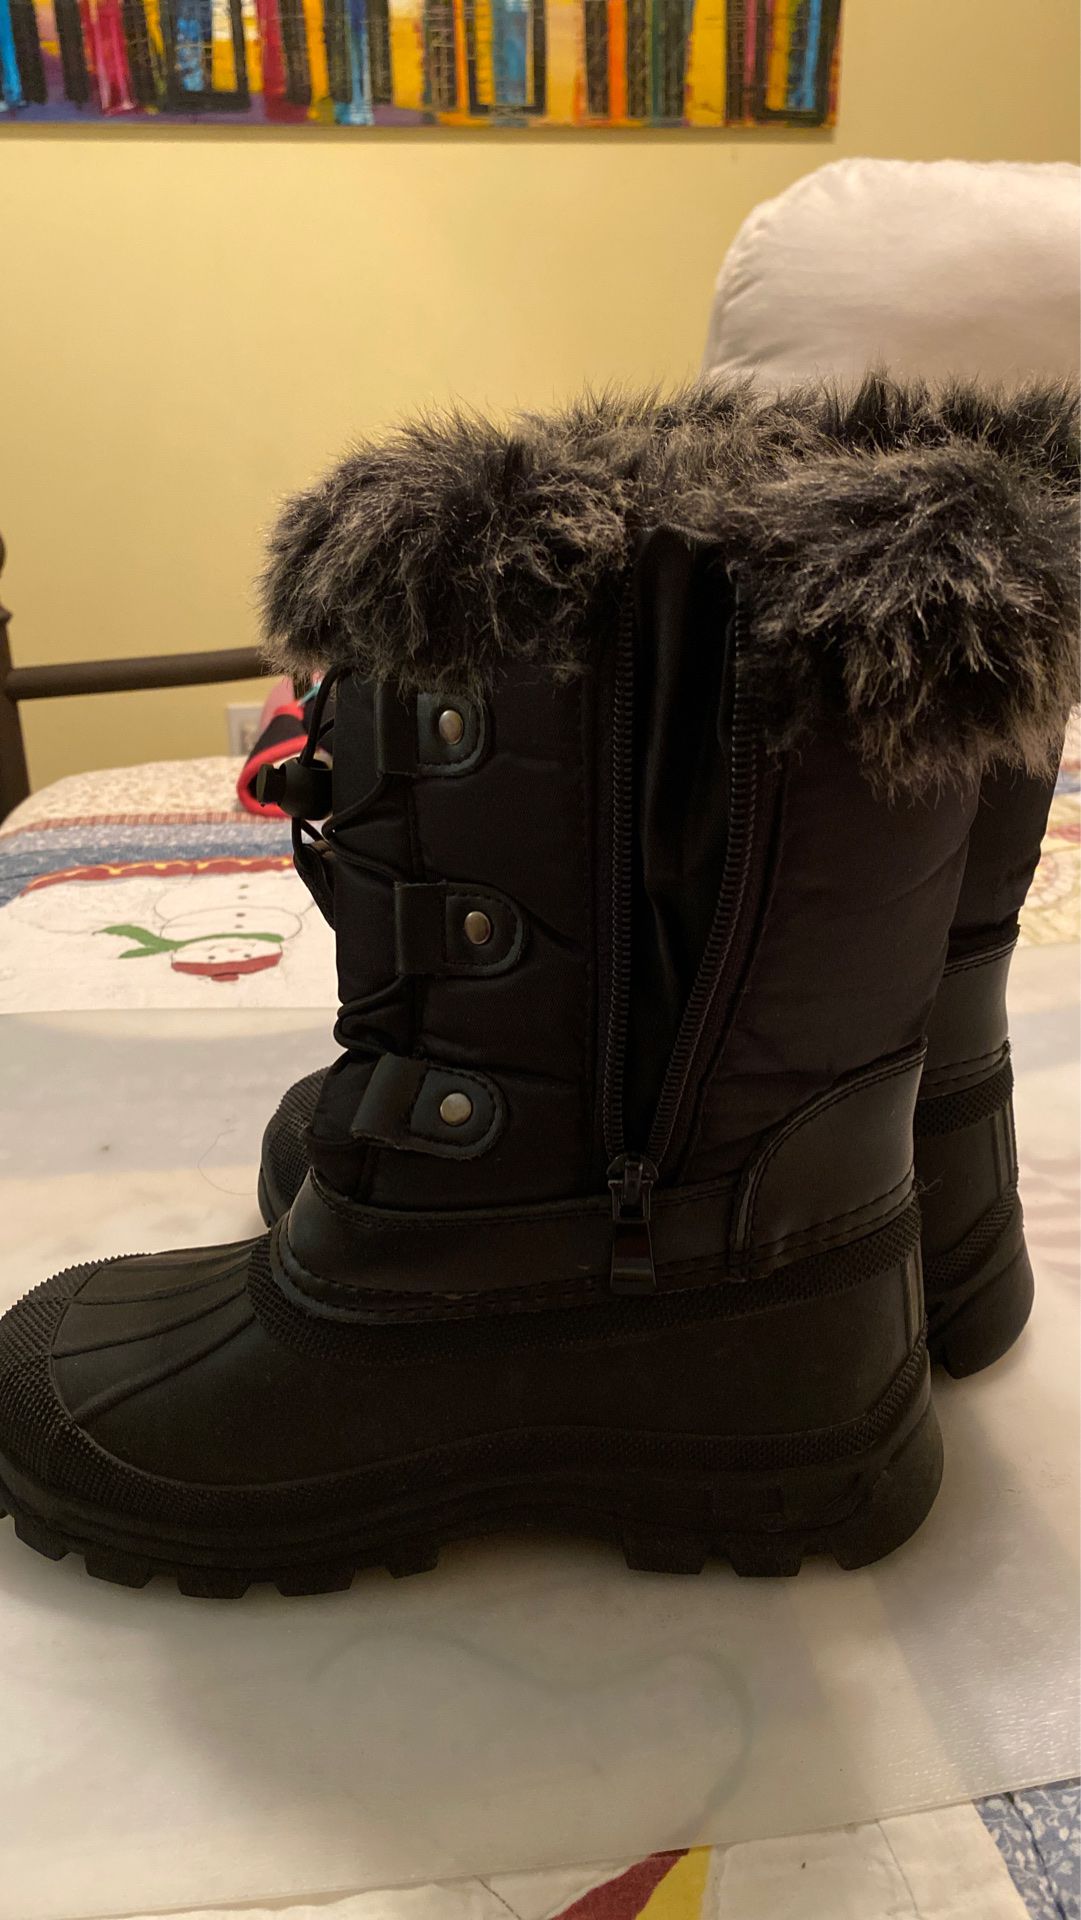 Snow boots for kids size 13